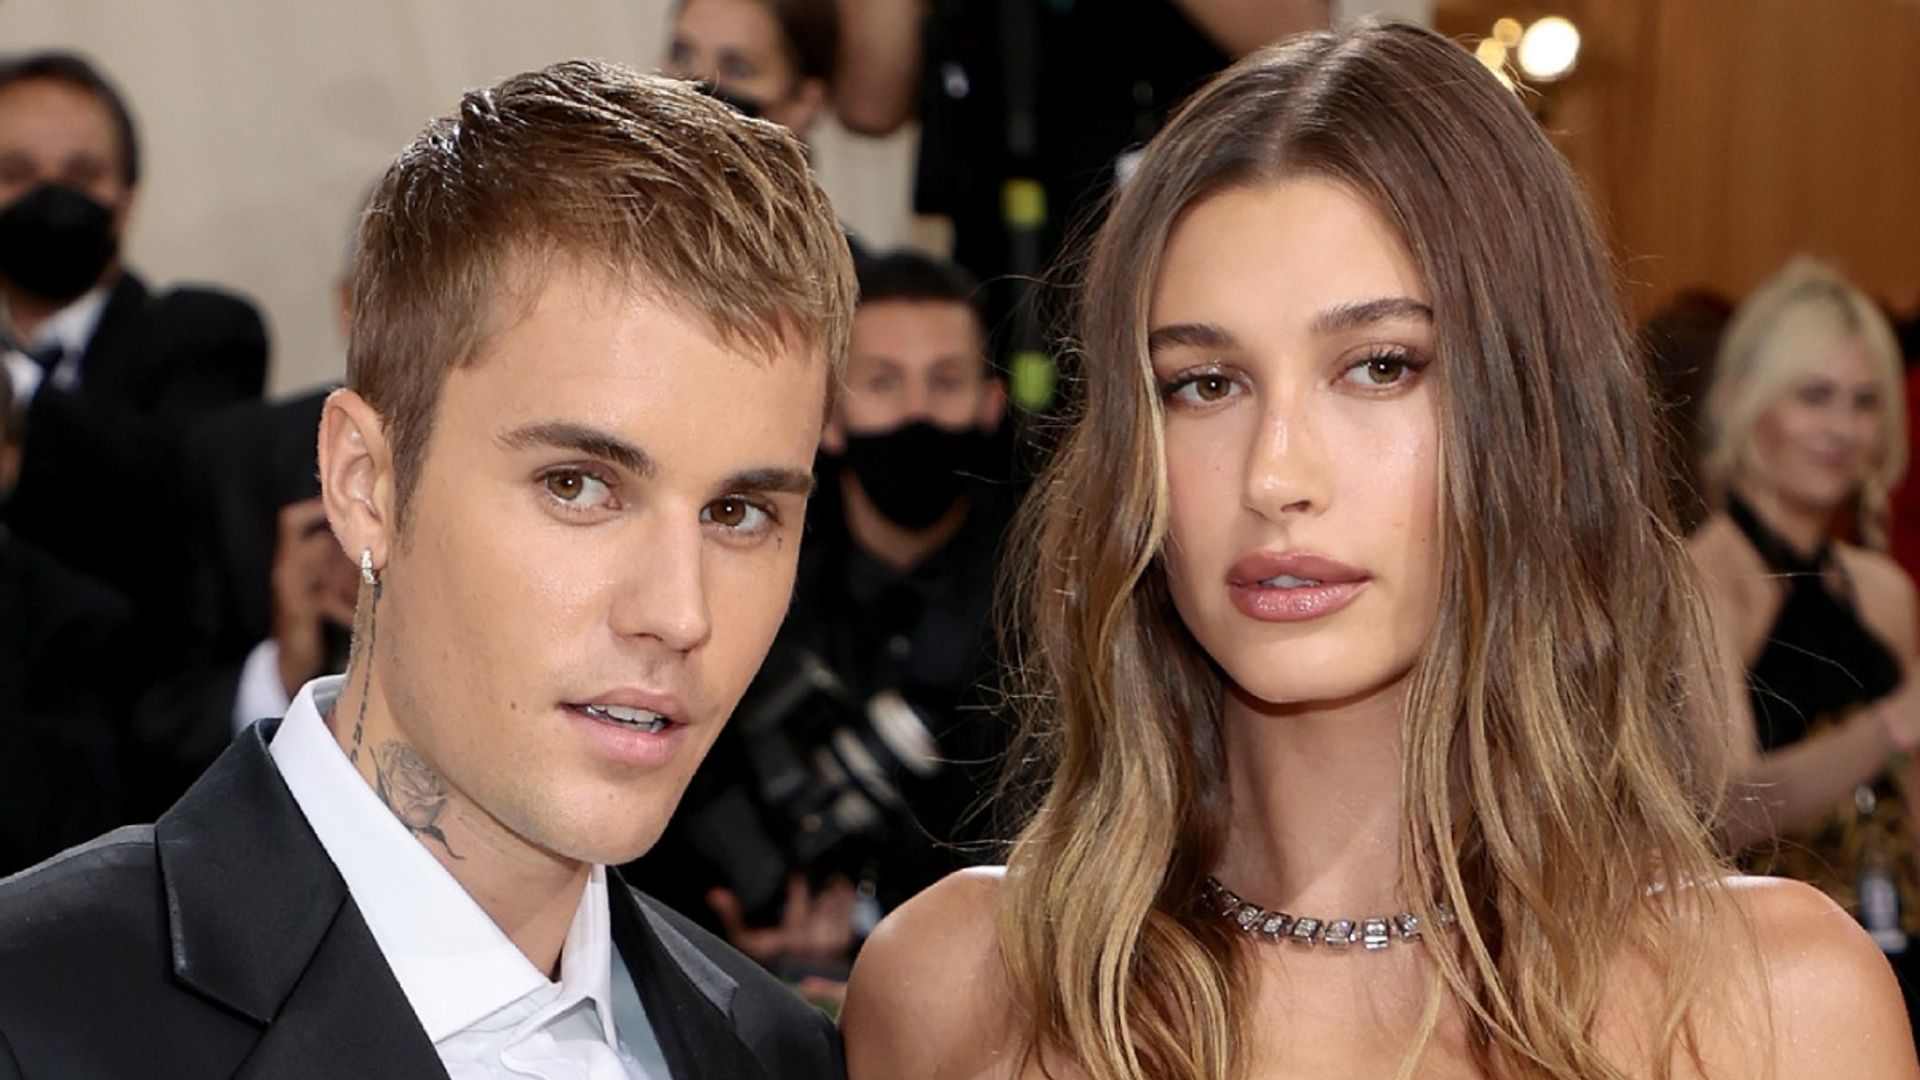 Hailey and Justin Bieber celebrate special news at 2021 Met Gala